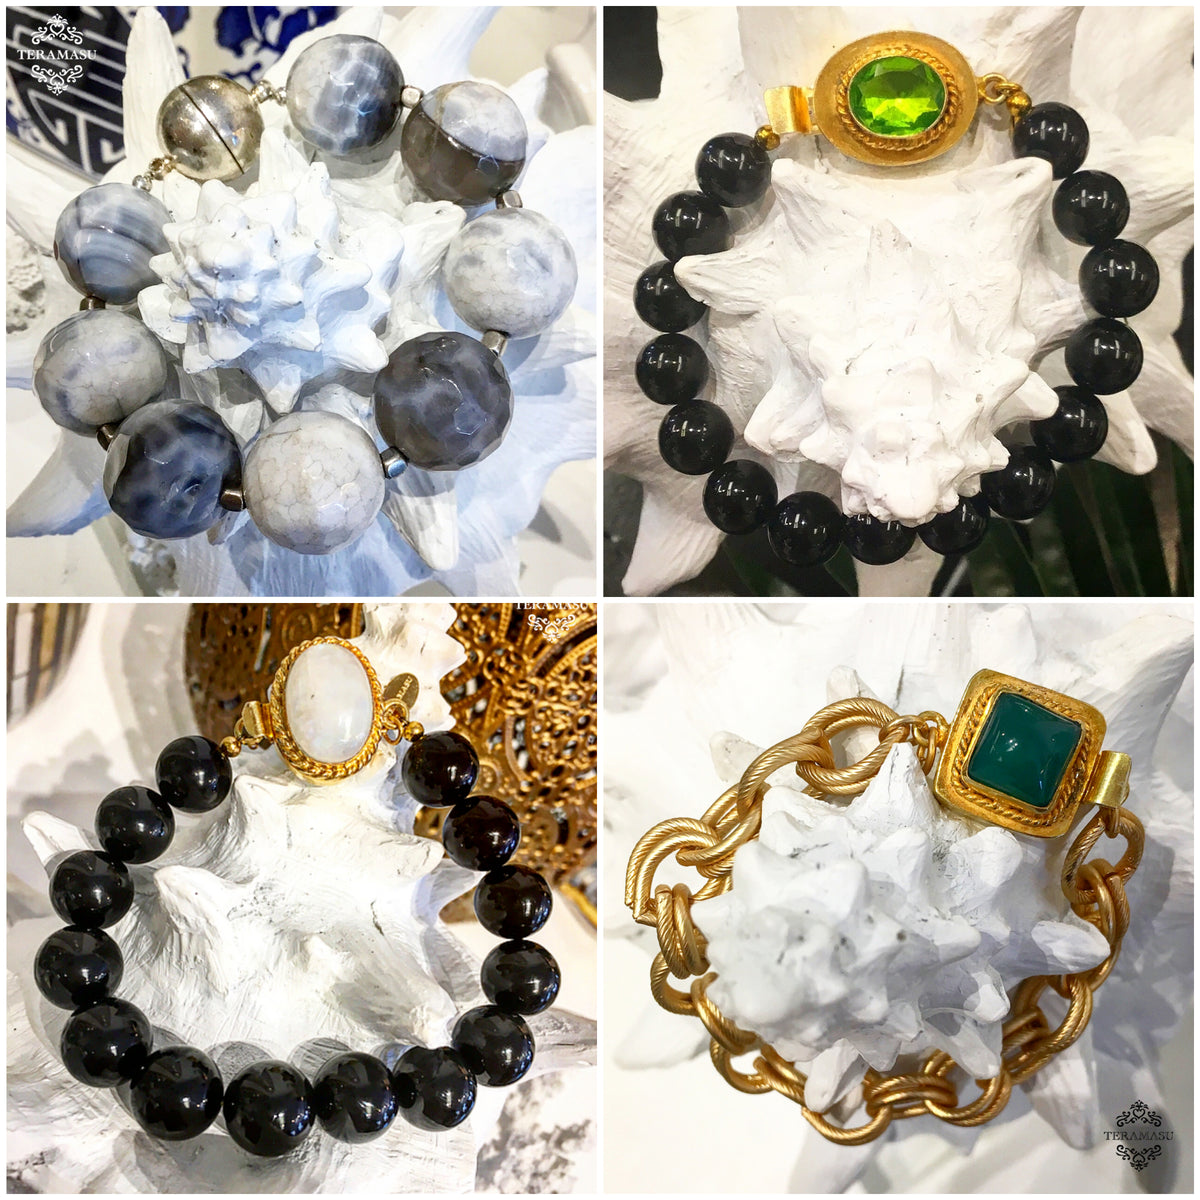 Chic Peek: The Perfect, Handmade Designer Statement Bracelets for Your One-of-a-Kind Fall Style